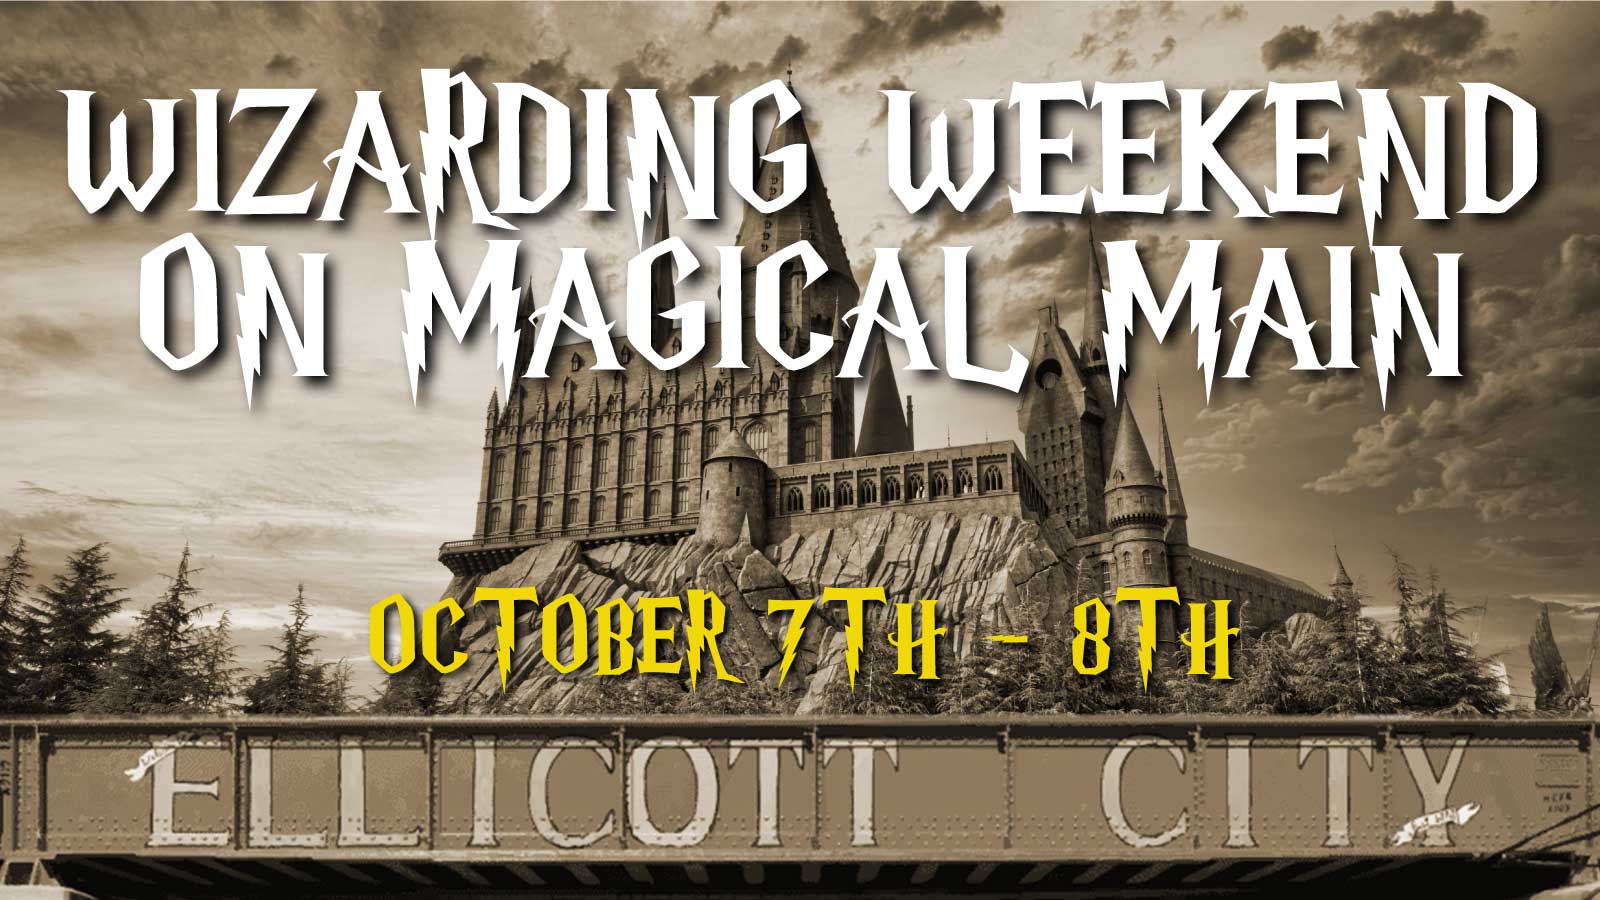 Wizarding Weekend On Magical Main Old Ellicott City